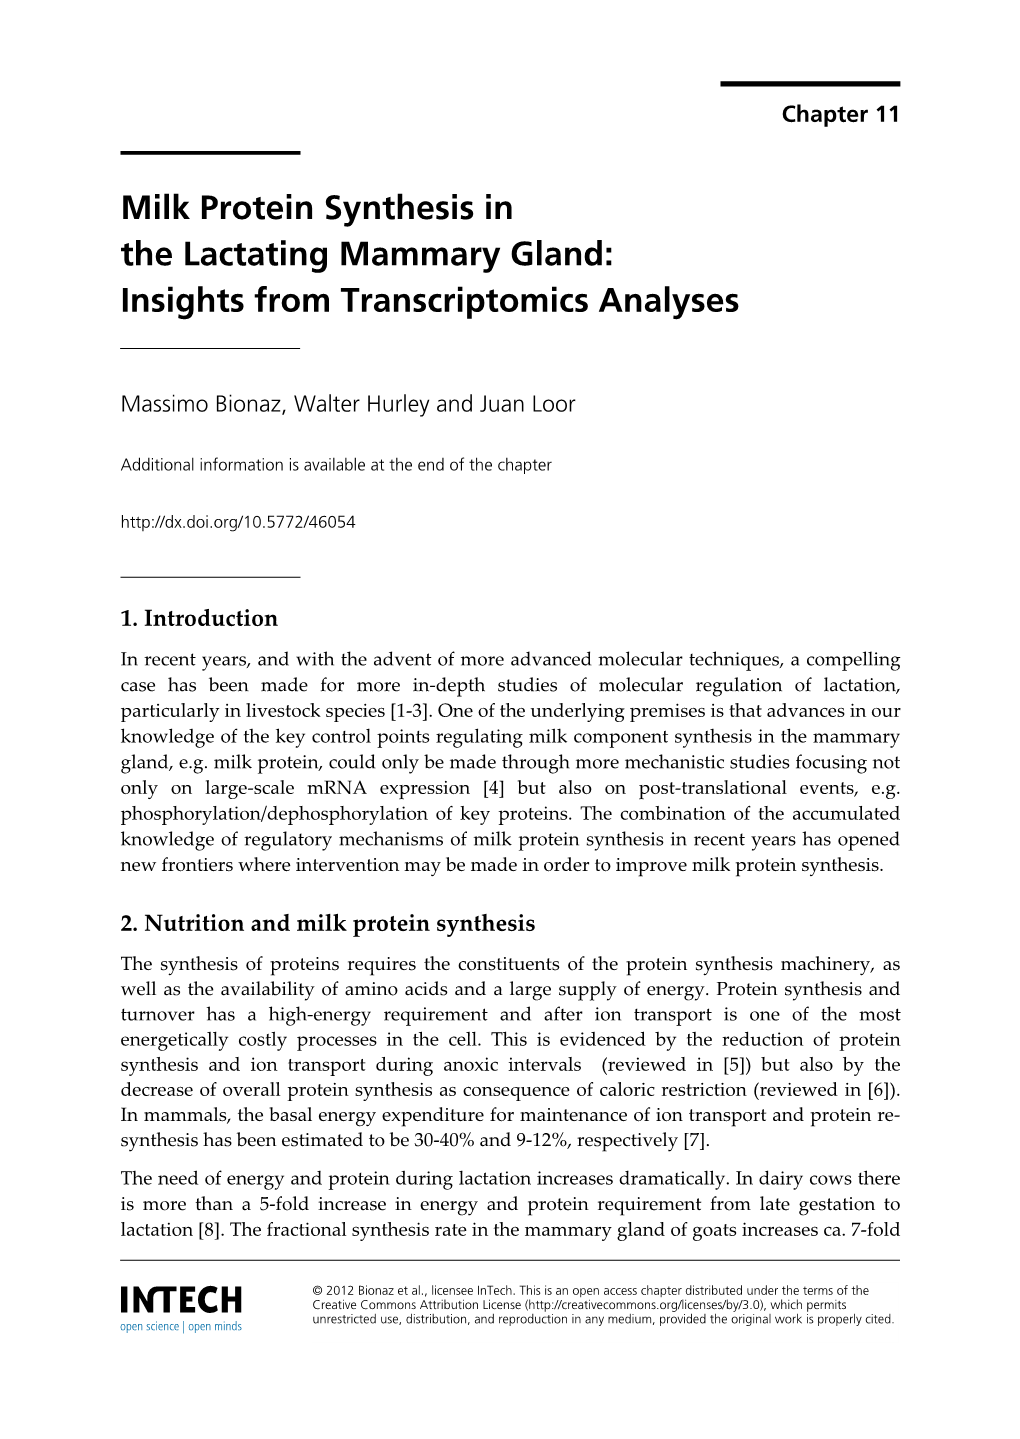 Milk Protein Synthesis in the Lactating Mammary Gland: Insights from Transcriptomics Analyses